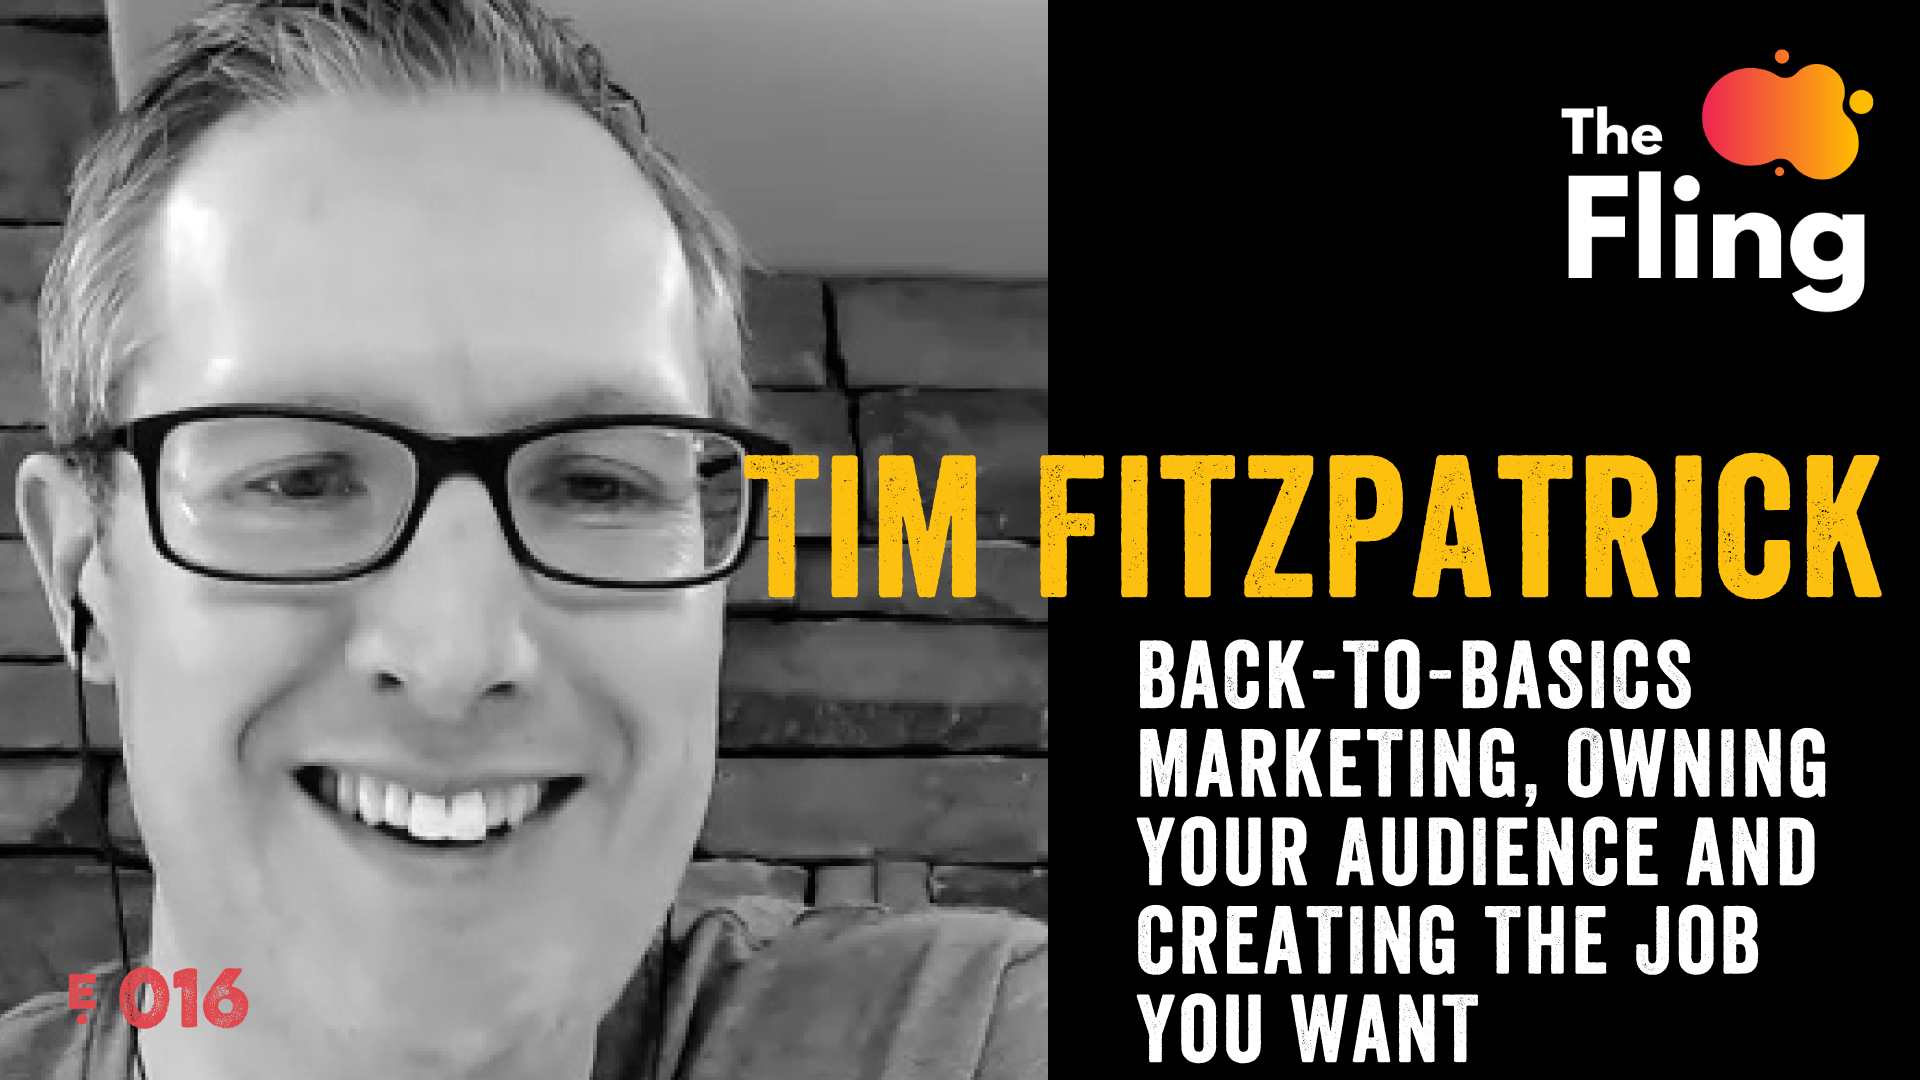 Tim Fitzpatrick of Rialto Marketing Interviewed on The Fling Podcast